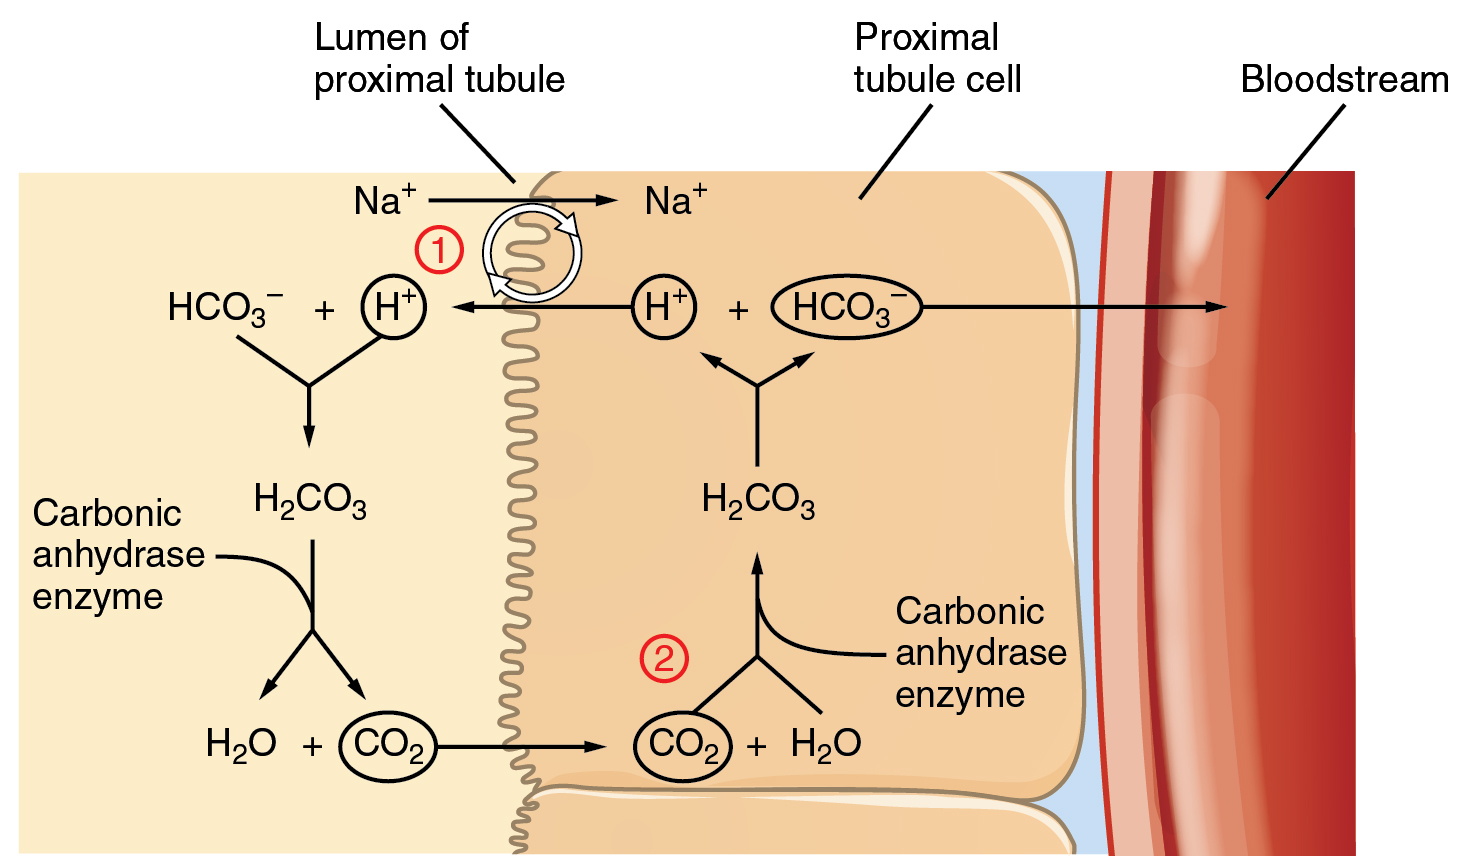 This diagram depicts a cross section of the left wall of a kidney proximal tubule. The wall is composed of two block-shaped cells arranged vertically one on top of each other. The lumen of the proximal tubule is to the left of the two cells. Yellow-colored urine is flowing through the lumen. There is a small strip of blue interstitial fluid to the right of the two cells. To the right of the interstitial fluid is a cross section of a blood vessel. A loop of chemical reactions is occurring in the diagram. Within the lumen of the proximal tubule, HCO three minus is combining with an H plus ion that enters the lumen from a proximal tubule cell. This reaction forms H two CO three. H two CO three then breaks into H two O and CO two, a reaction catalyzed by the enzyme carbonic anhydrase. The CO two then moves from the lumen of the proximal tubule into one of the proximal tubule cells. There, the reaction runs in reverse, with CO two combining with H two O to form H two CO three. The H two CO three then splits into H plus and HCO three minus. The H plus moves into the lumen, reinitiating the first step of the loop. The HCO three minus leaves the proximal tubule cell and enters the blood stream.